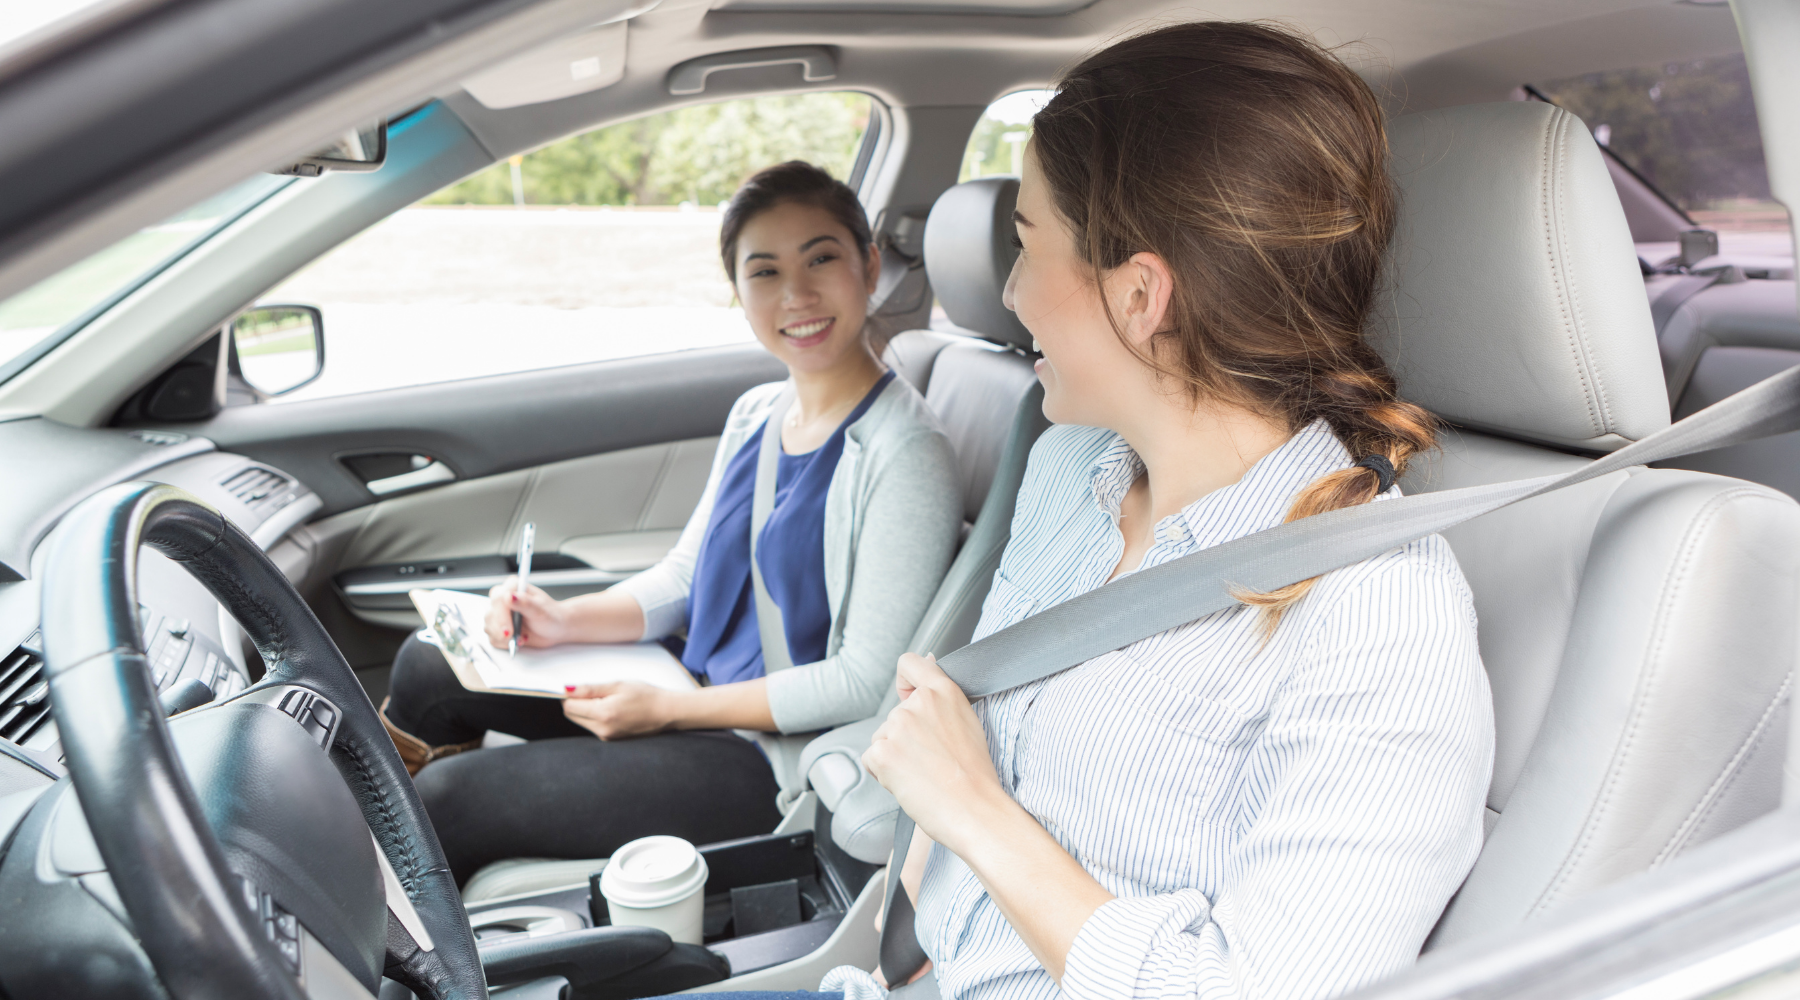 Parent’s Guide: Top Things to Teach Your Teen When They’re Learning to Drive